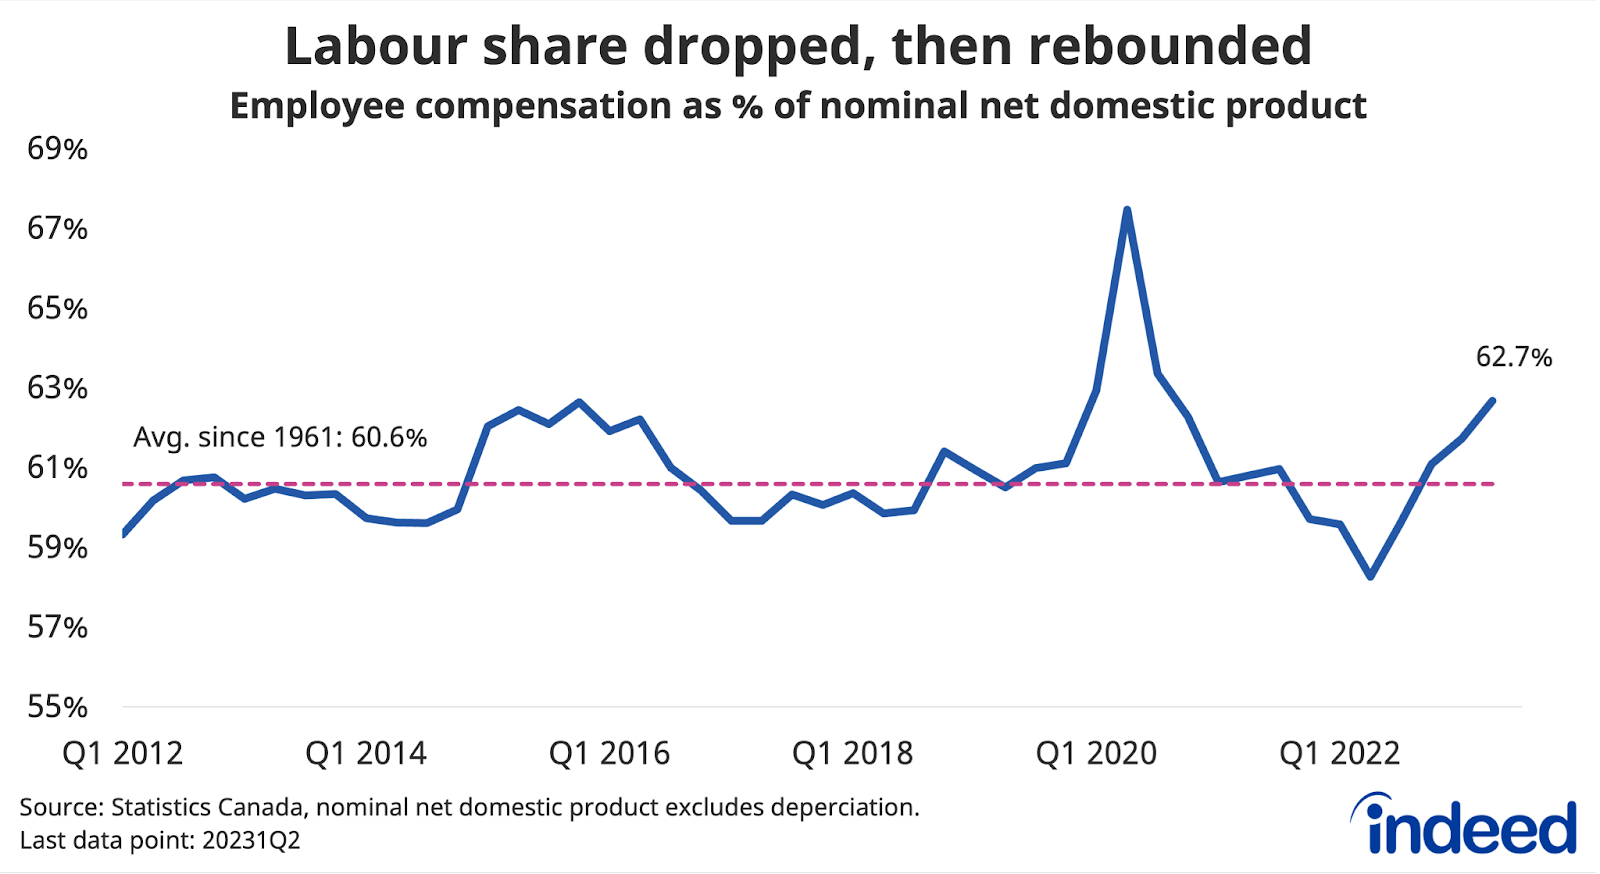 Line graph titled “Labour share dropped, then rebounded,” shows employee compensation as a share of nominal net domestic product between Q1 2012 and Q2 2023. After dropping between 2021 and mid-2022, the labour share of income rebounded back to 62.7% as of Q2 2023, above its 60.6% average since 1961. 